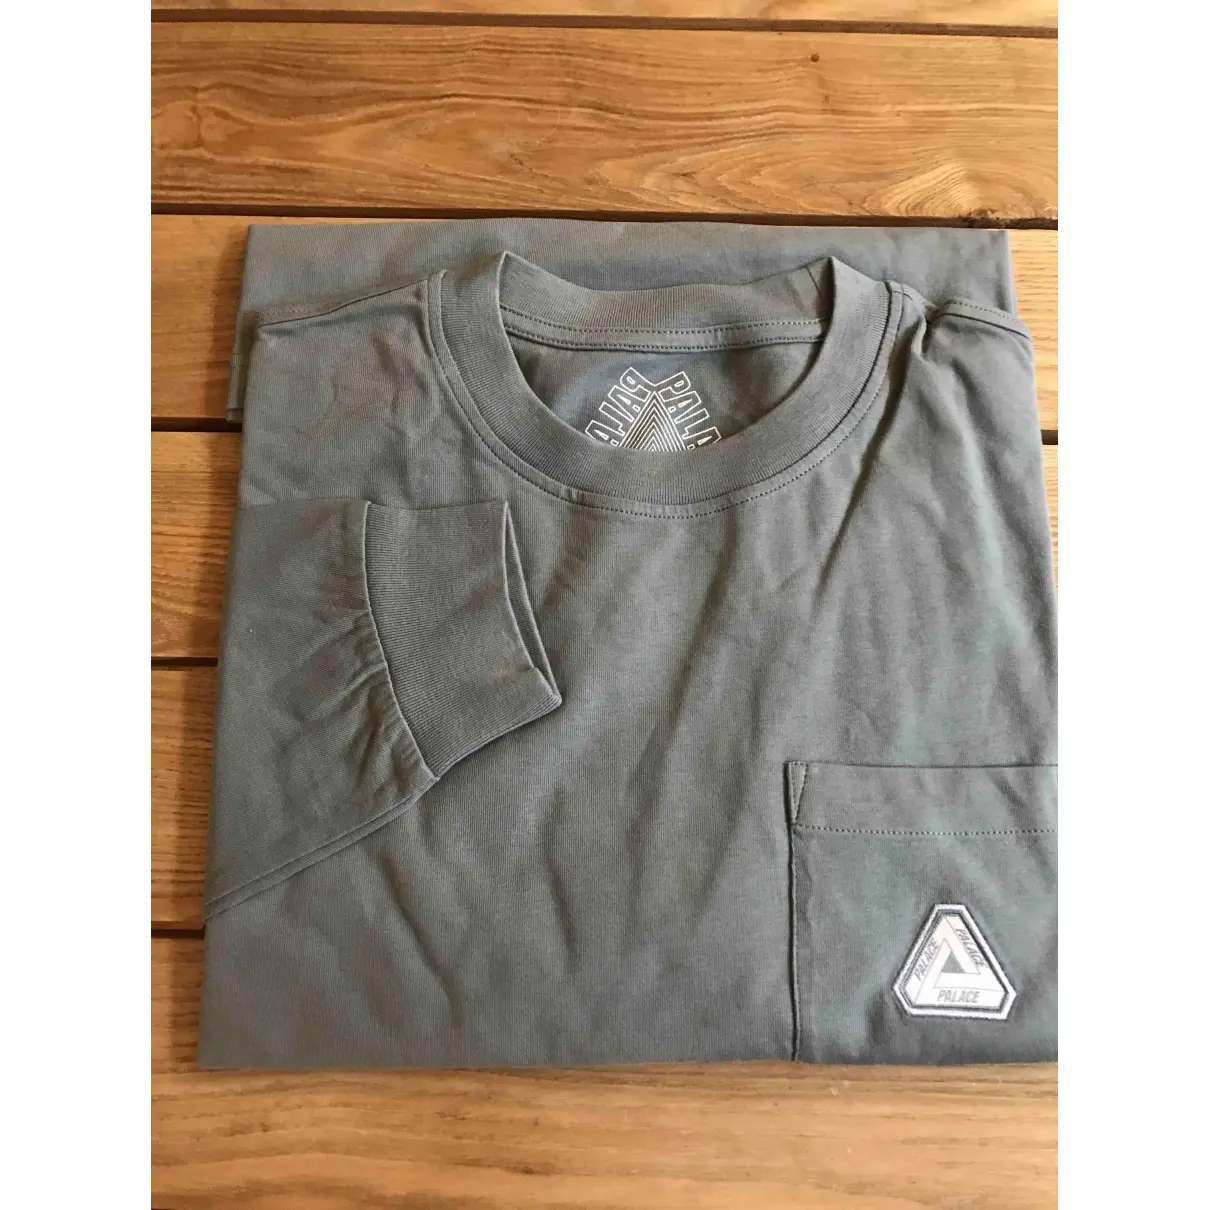 Palace T-shirt for sale